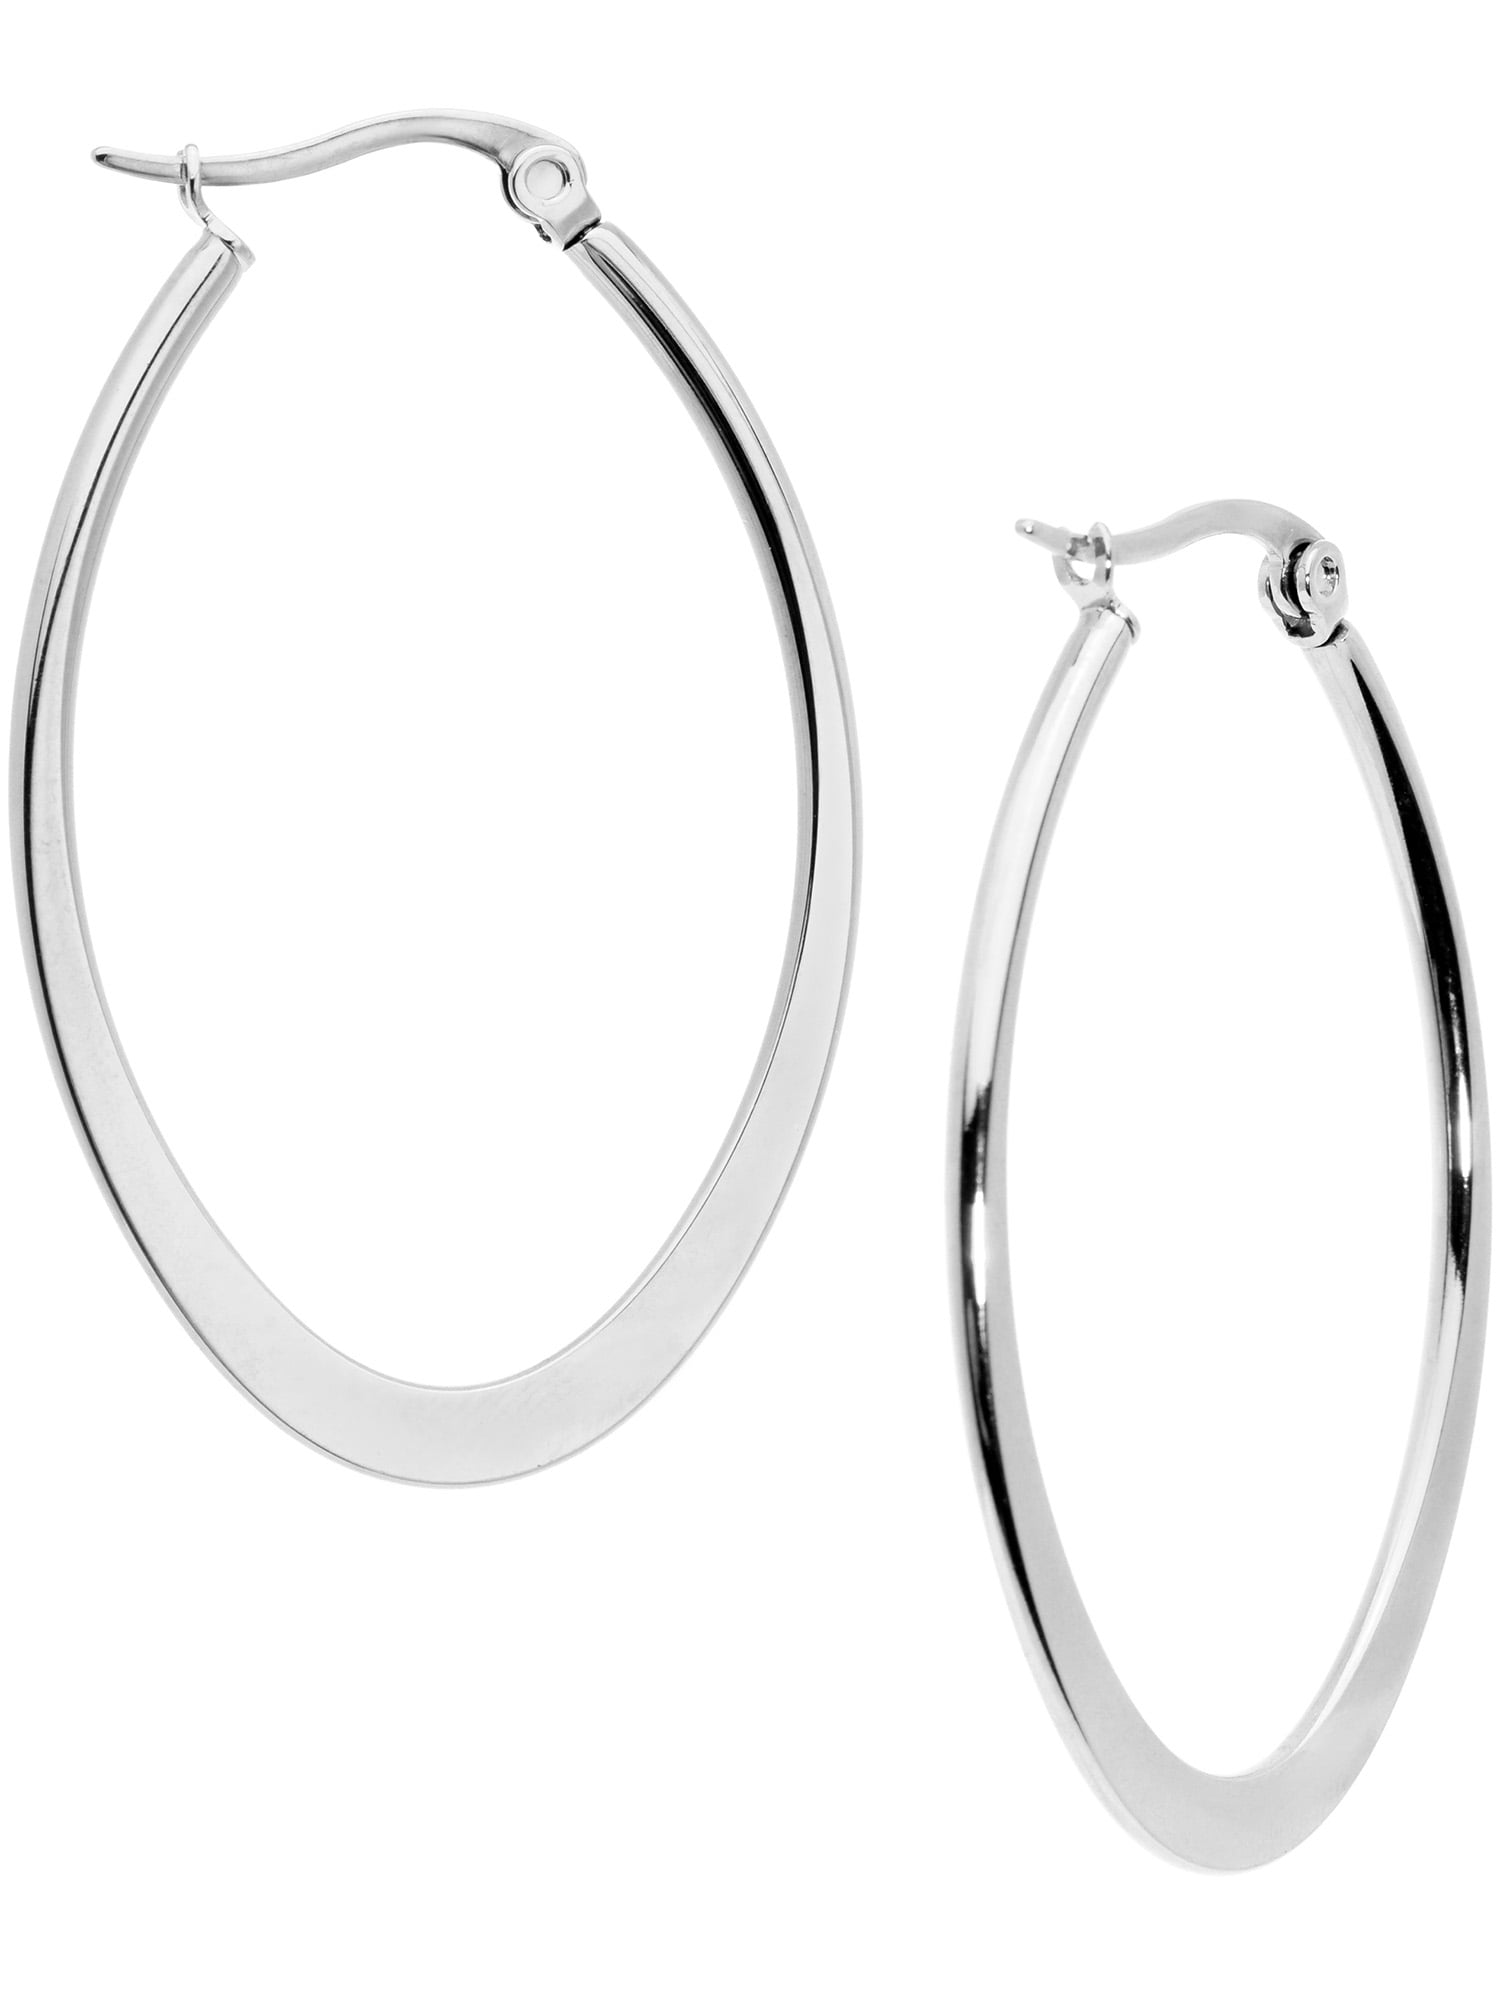 40mm x 48mm Stainless Steel Polished Hollow Oval Hoop Earrings